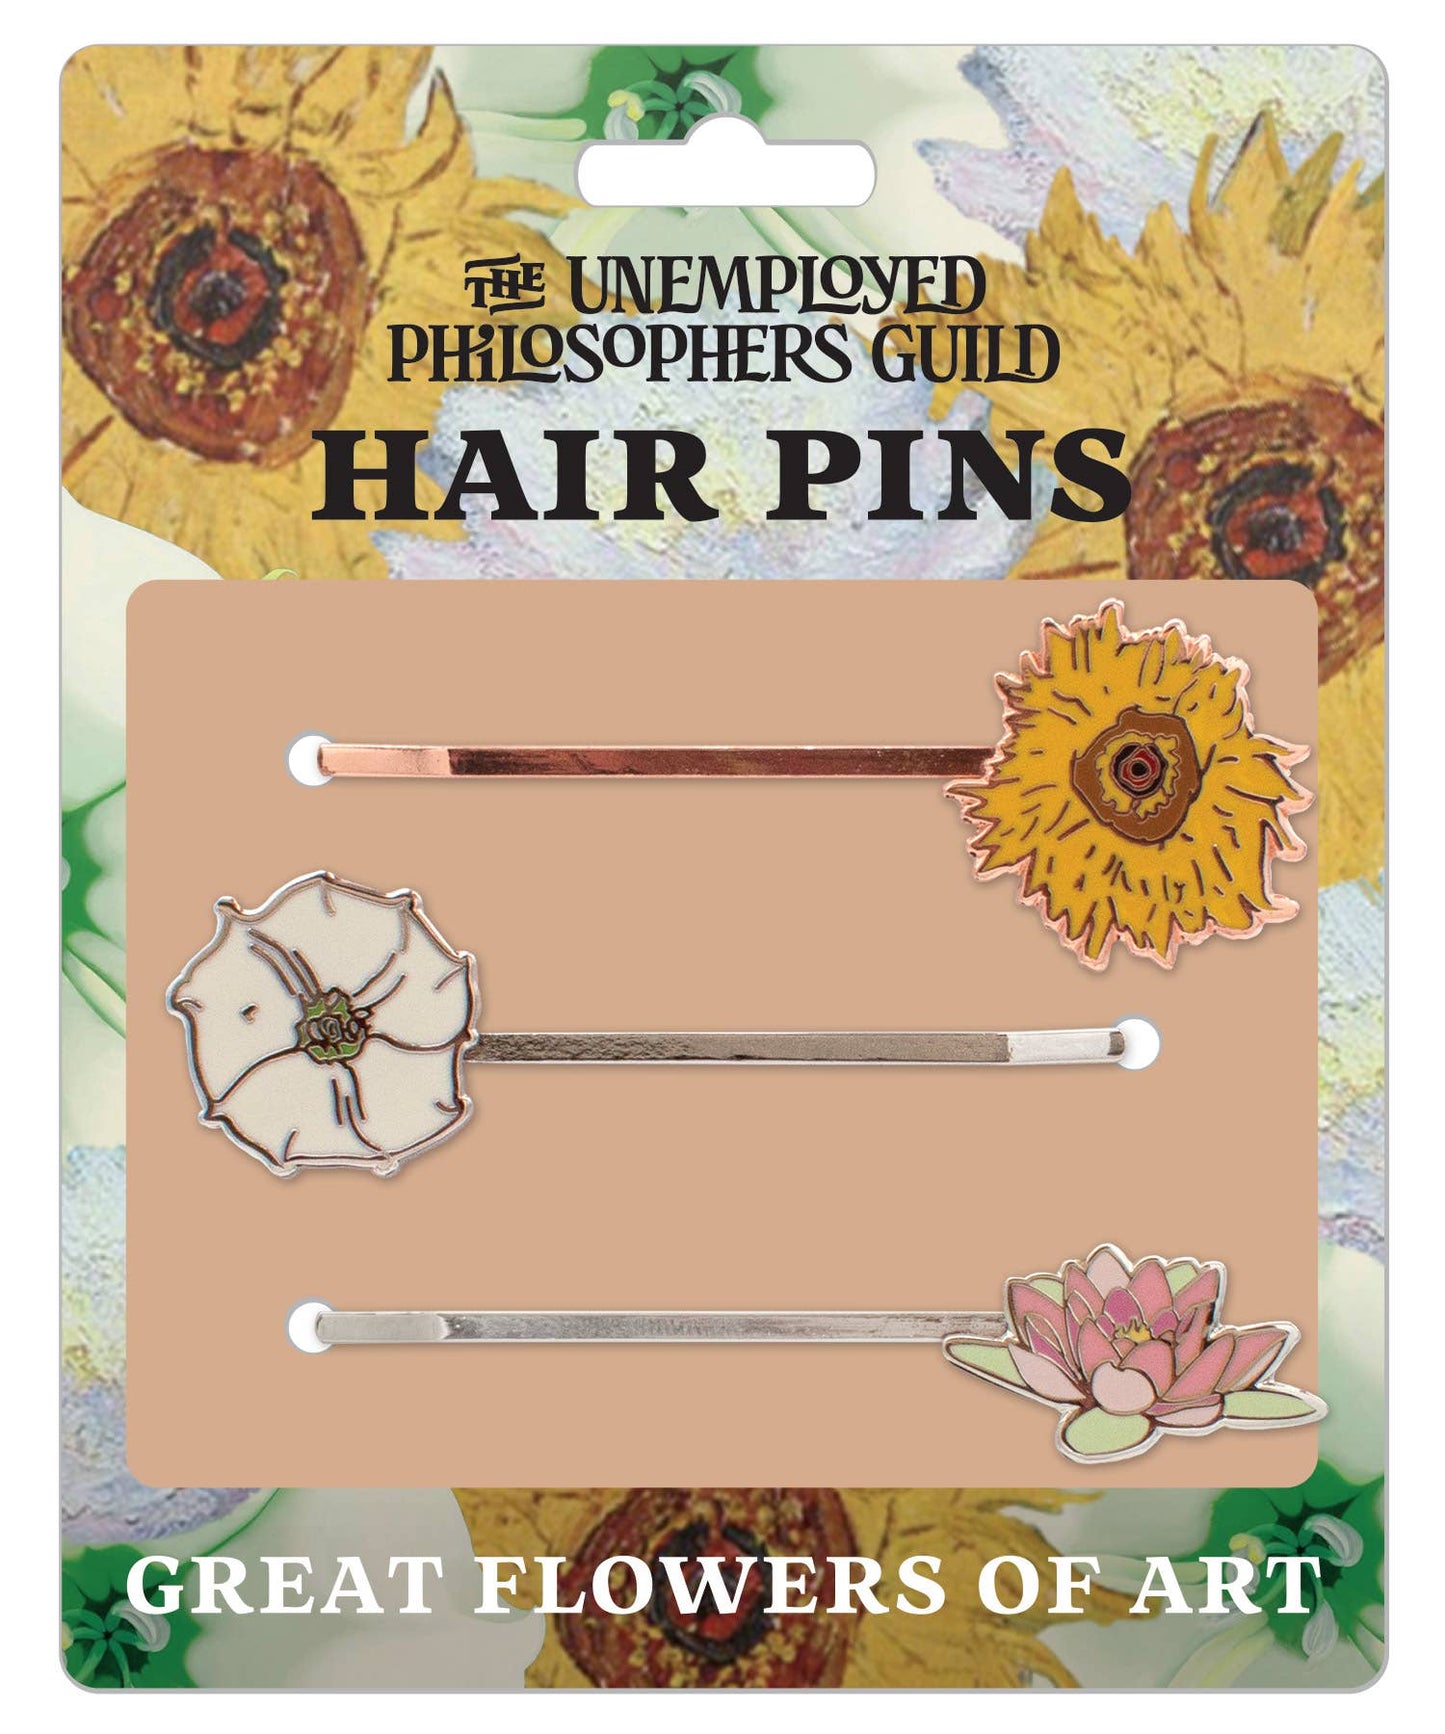 Great Flowers of Art Hair Pins from Unemployed Philosophers Guild